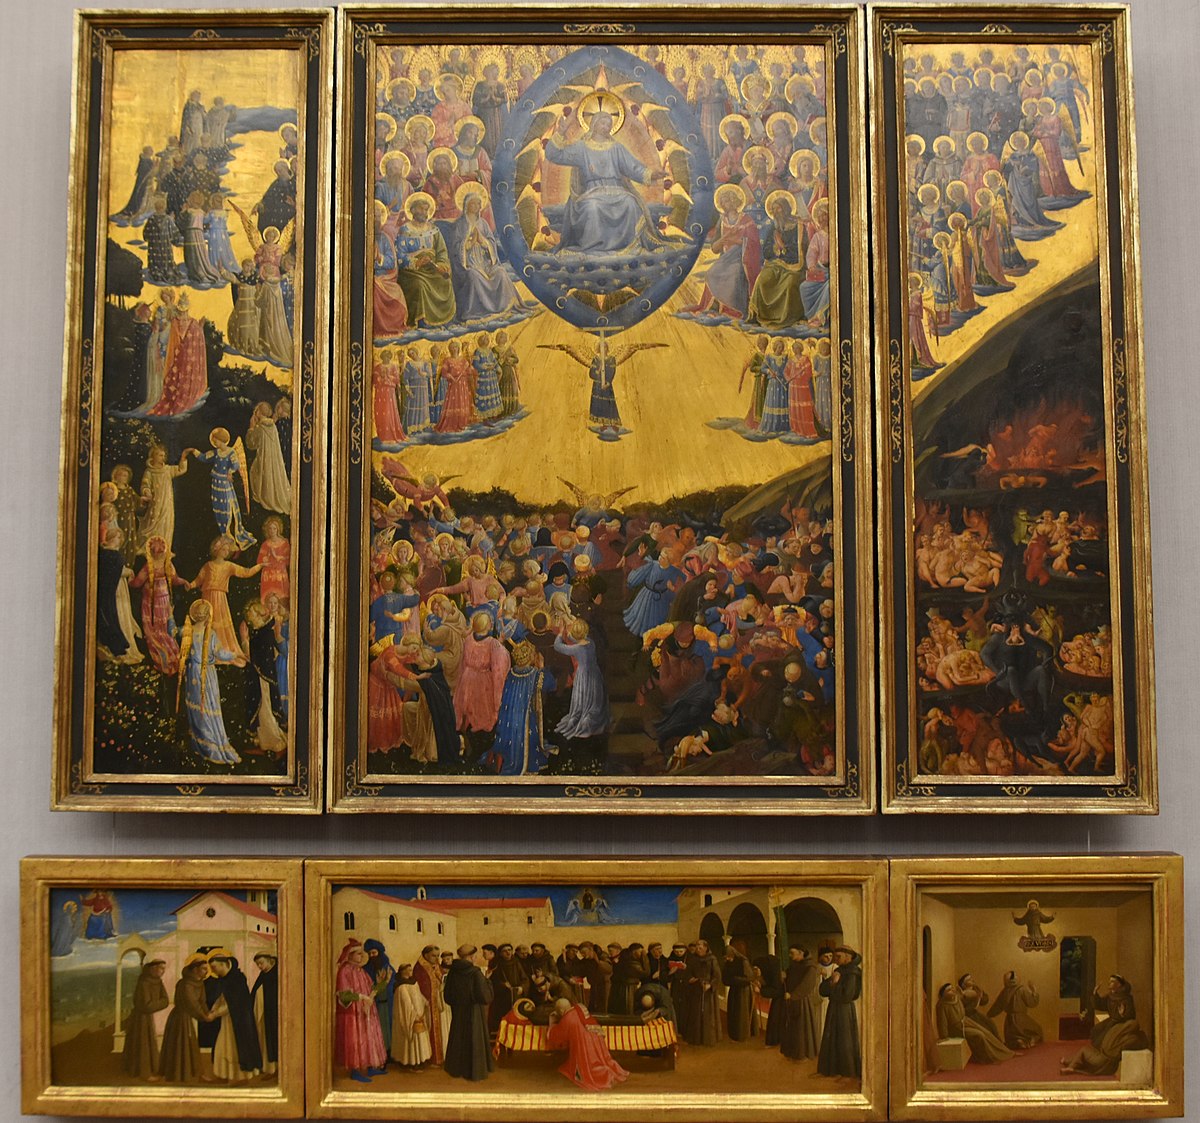 Triptych The Last Judgment Wikidata